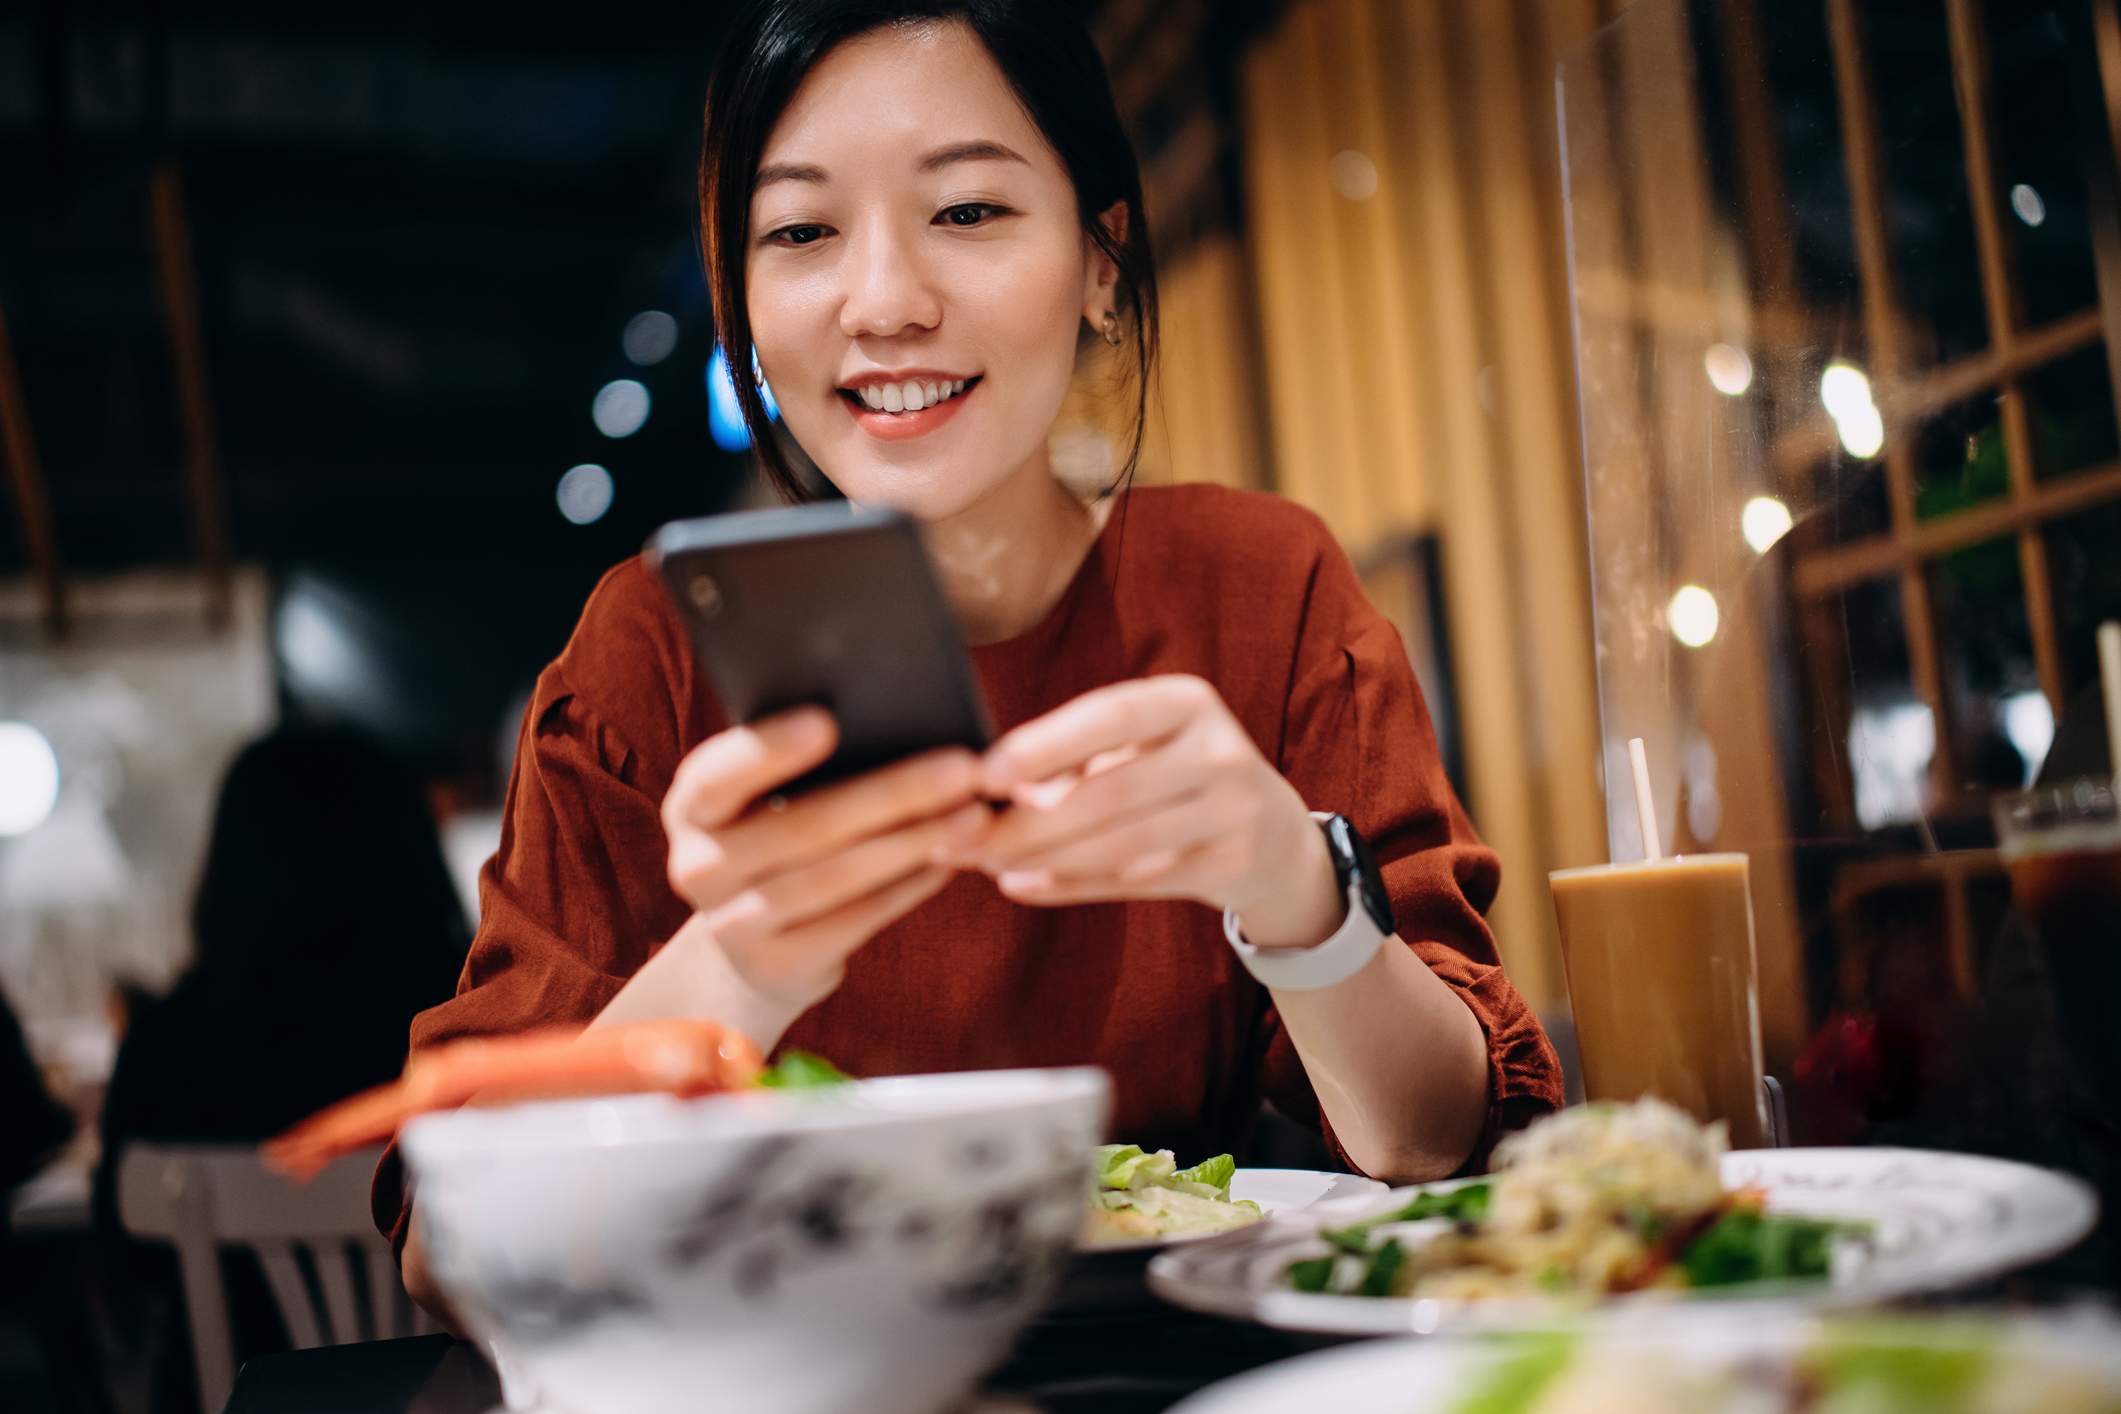 Image depicts a person at a restaurant using their phone. They are wearing a red shirt and a smartwatch and are smiling down at their food and their phone.